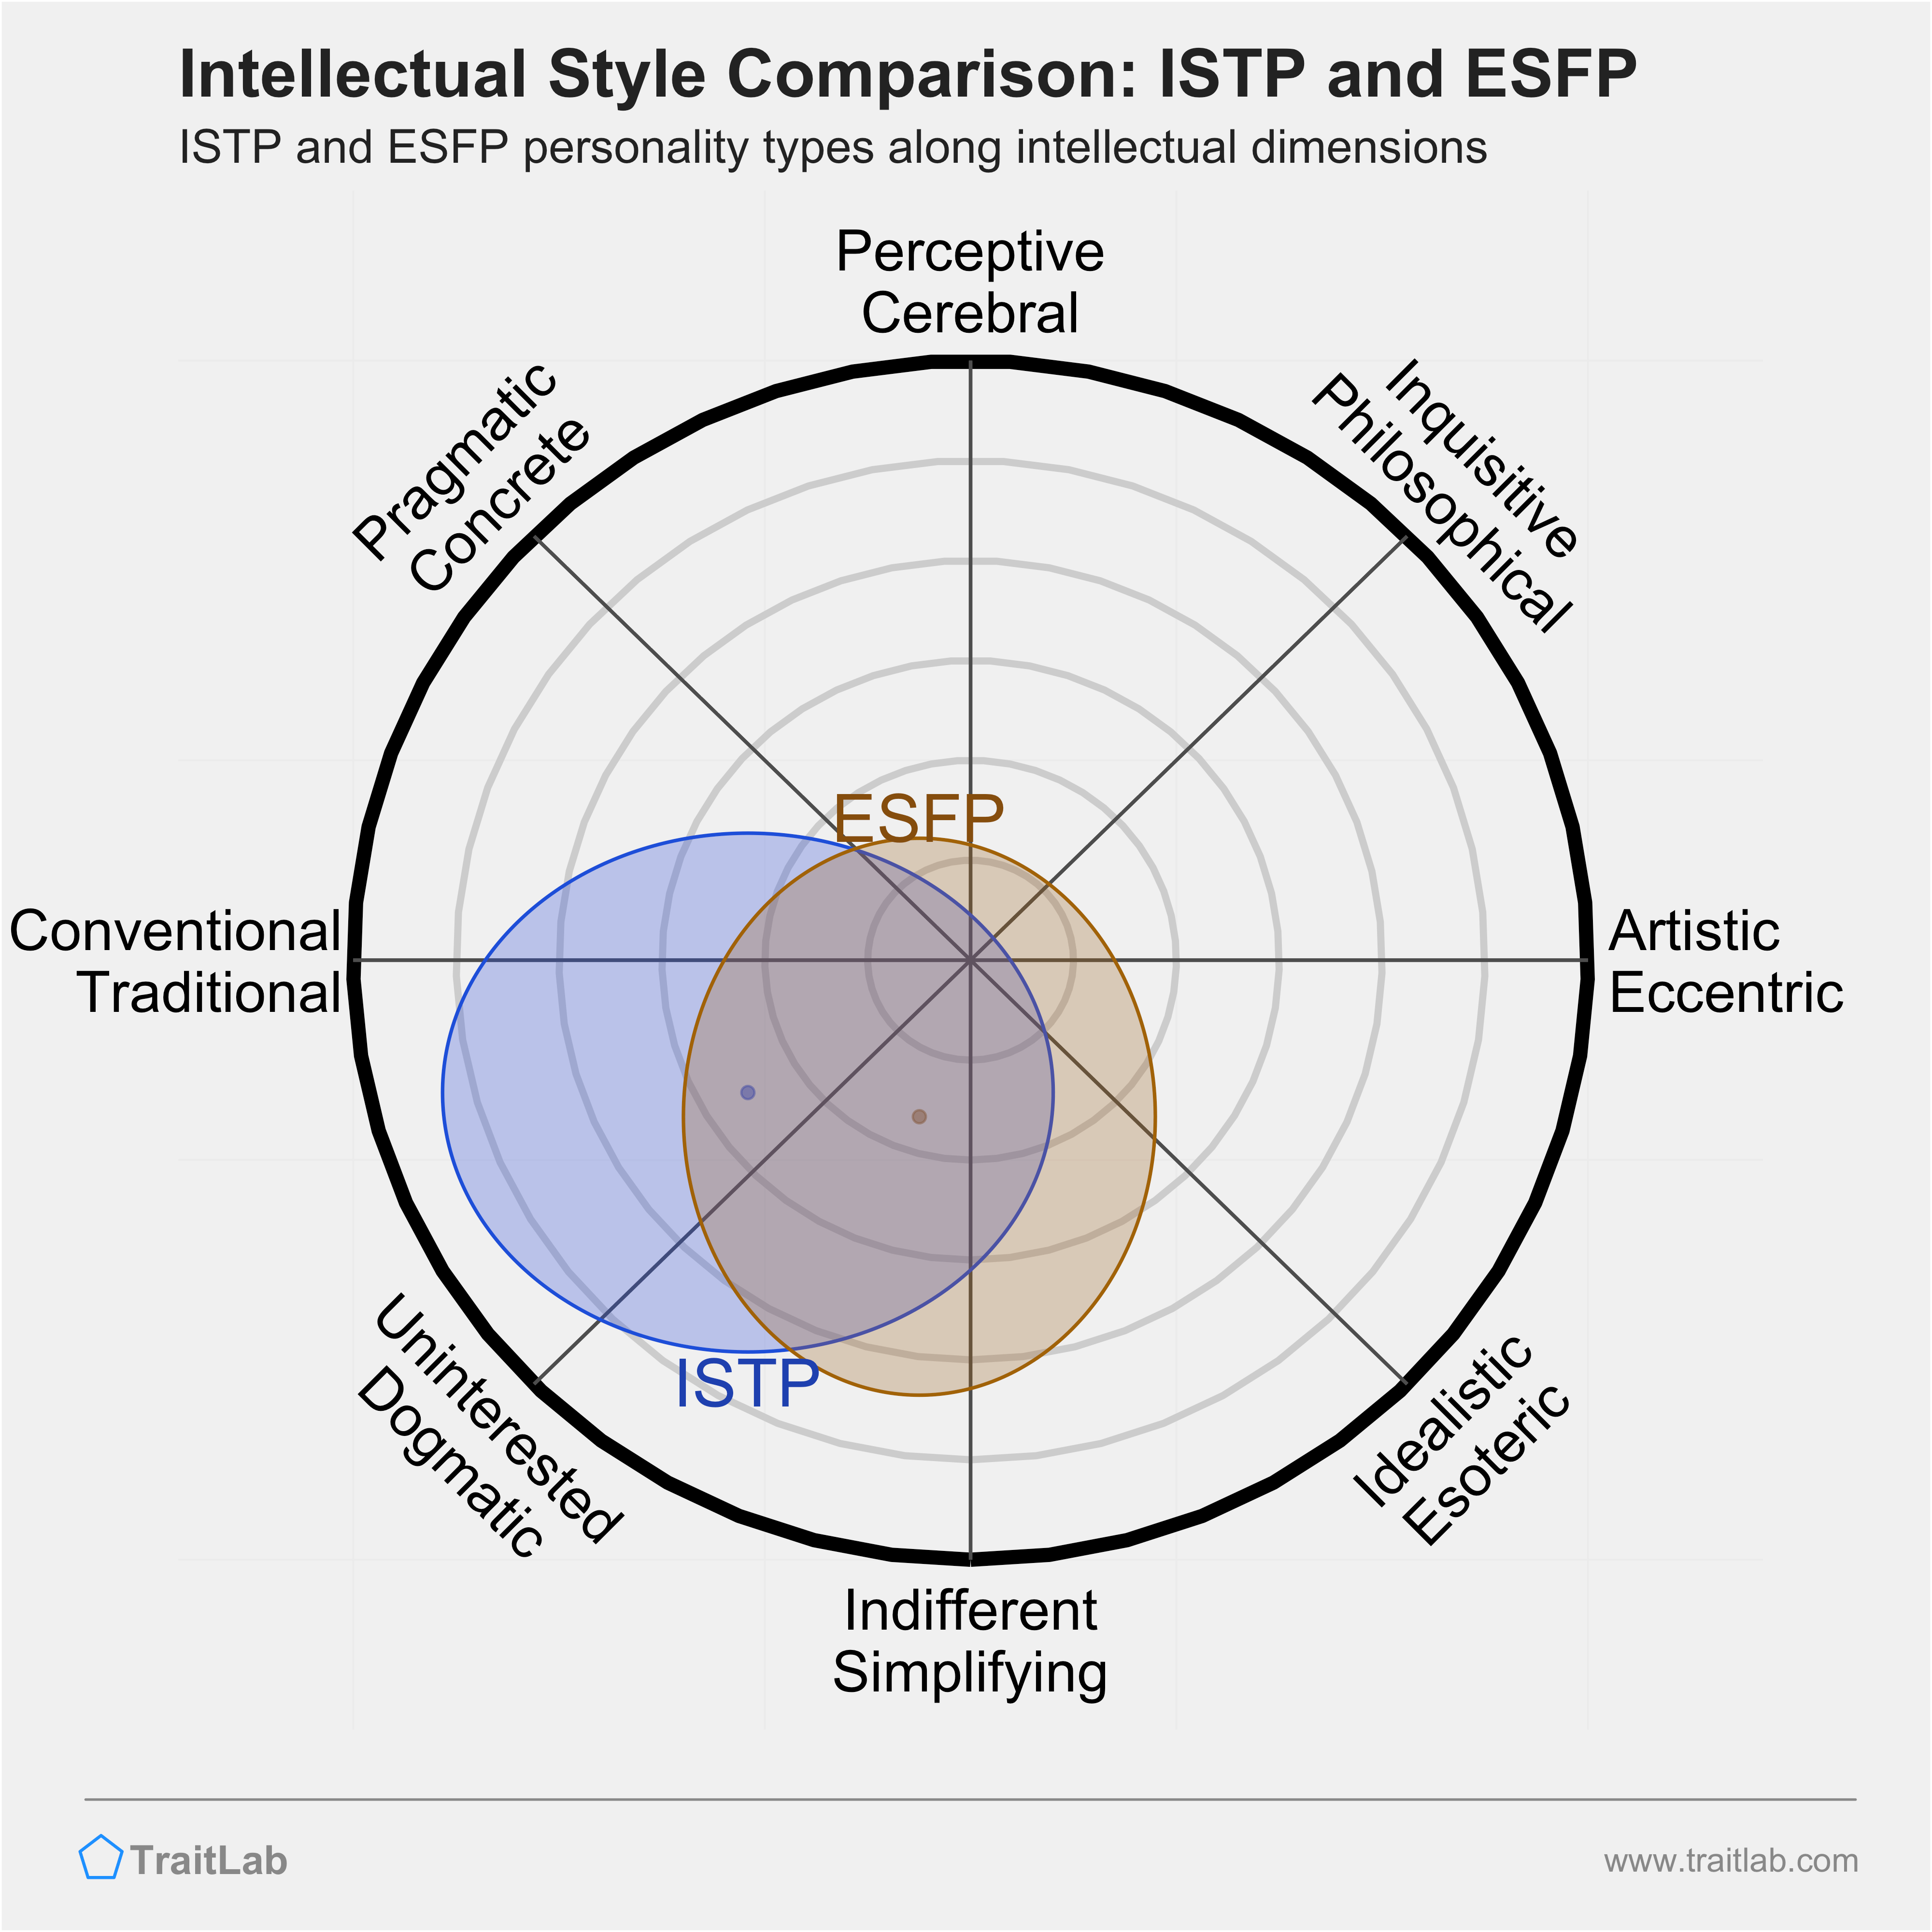 ISTP and ESFP comparison across intellectual dimensions